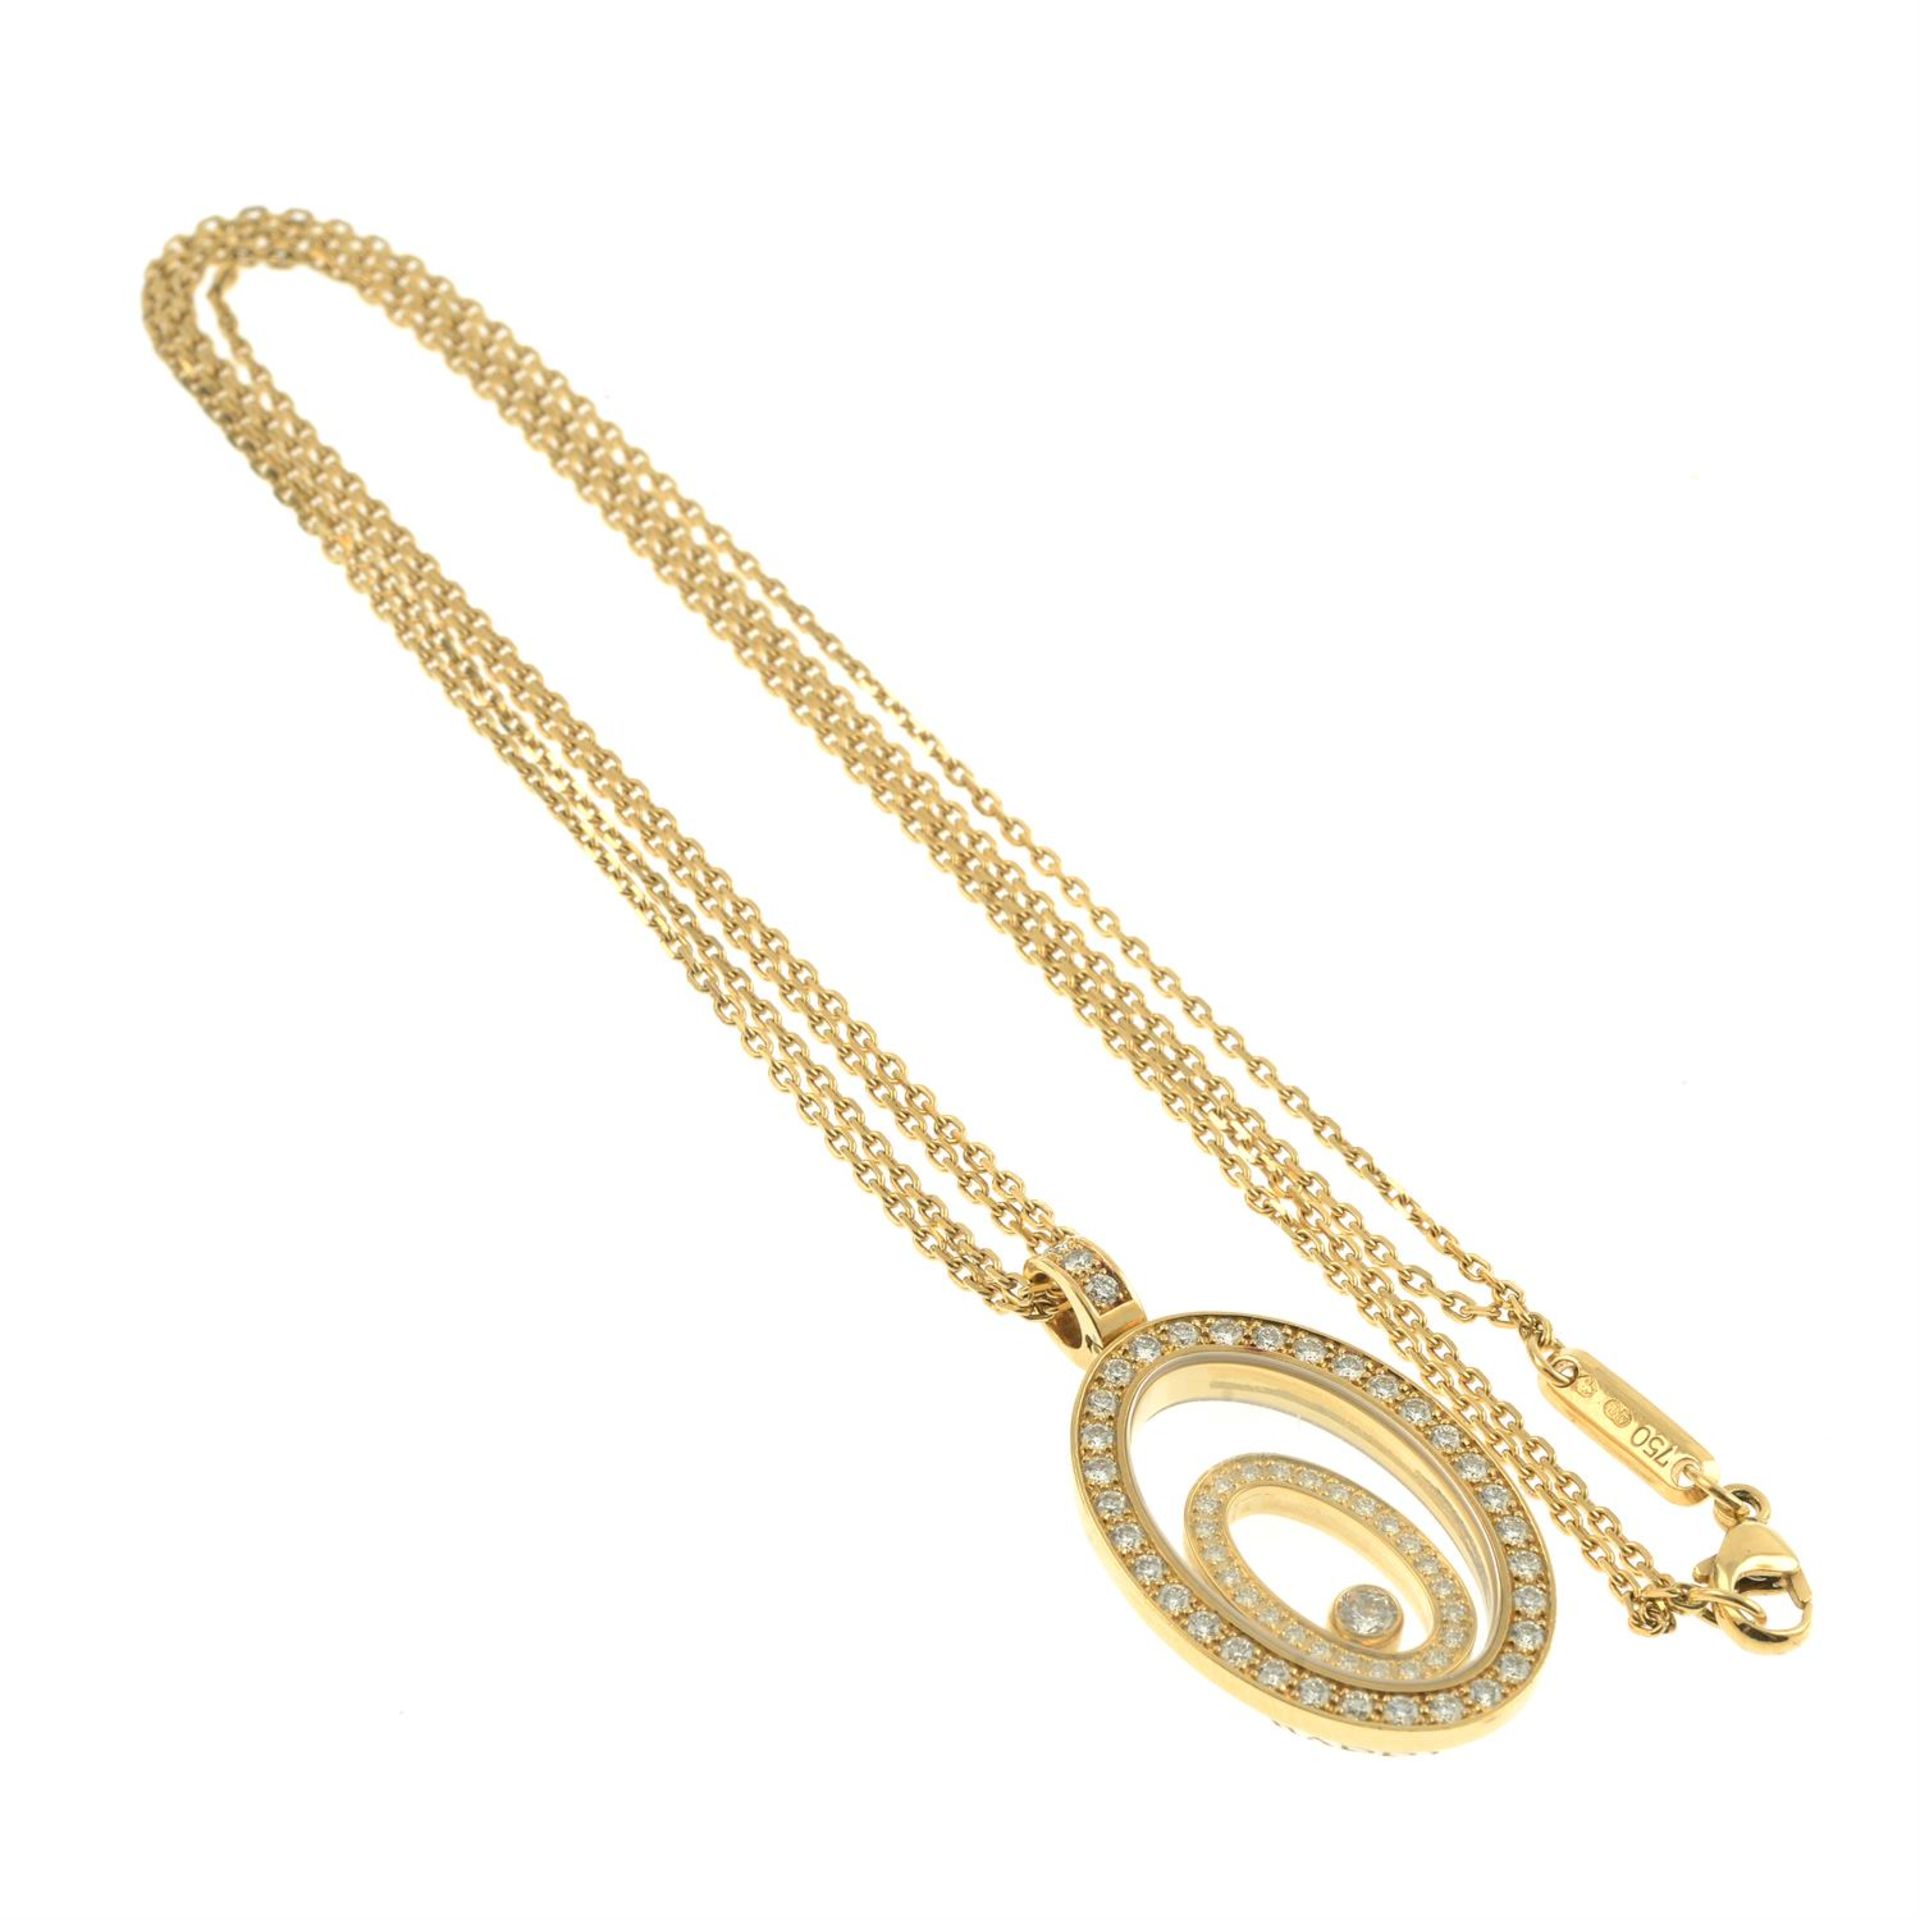 An 18ct gold brilliant-cut diamond 'Happy Spirit' pendant, with two-row chain, by Chopard. - Image 4 of 5